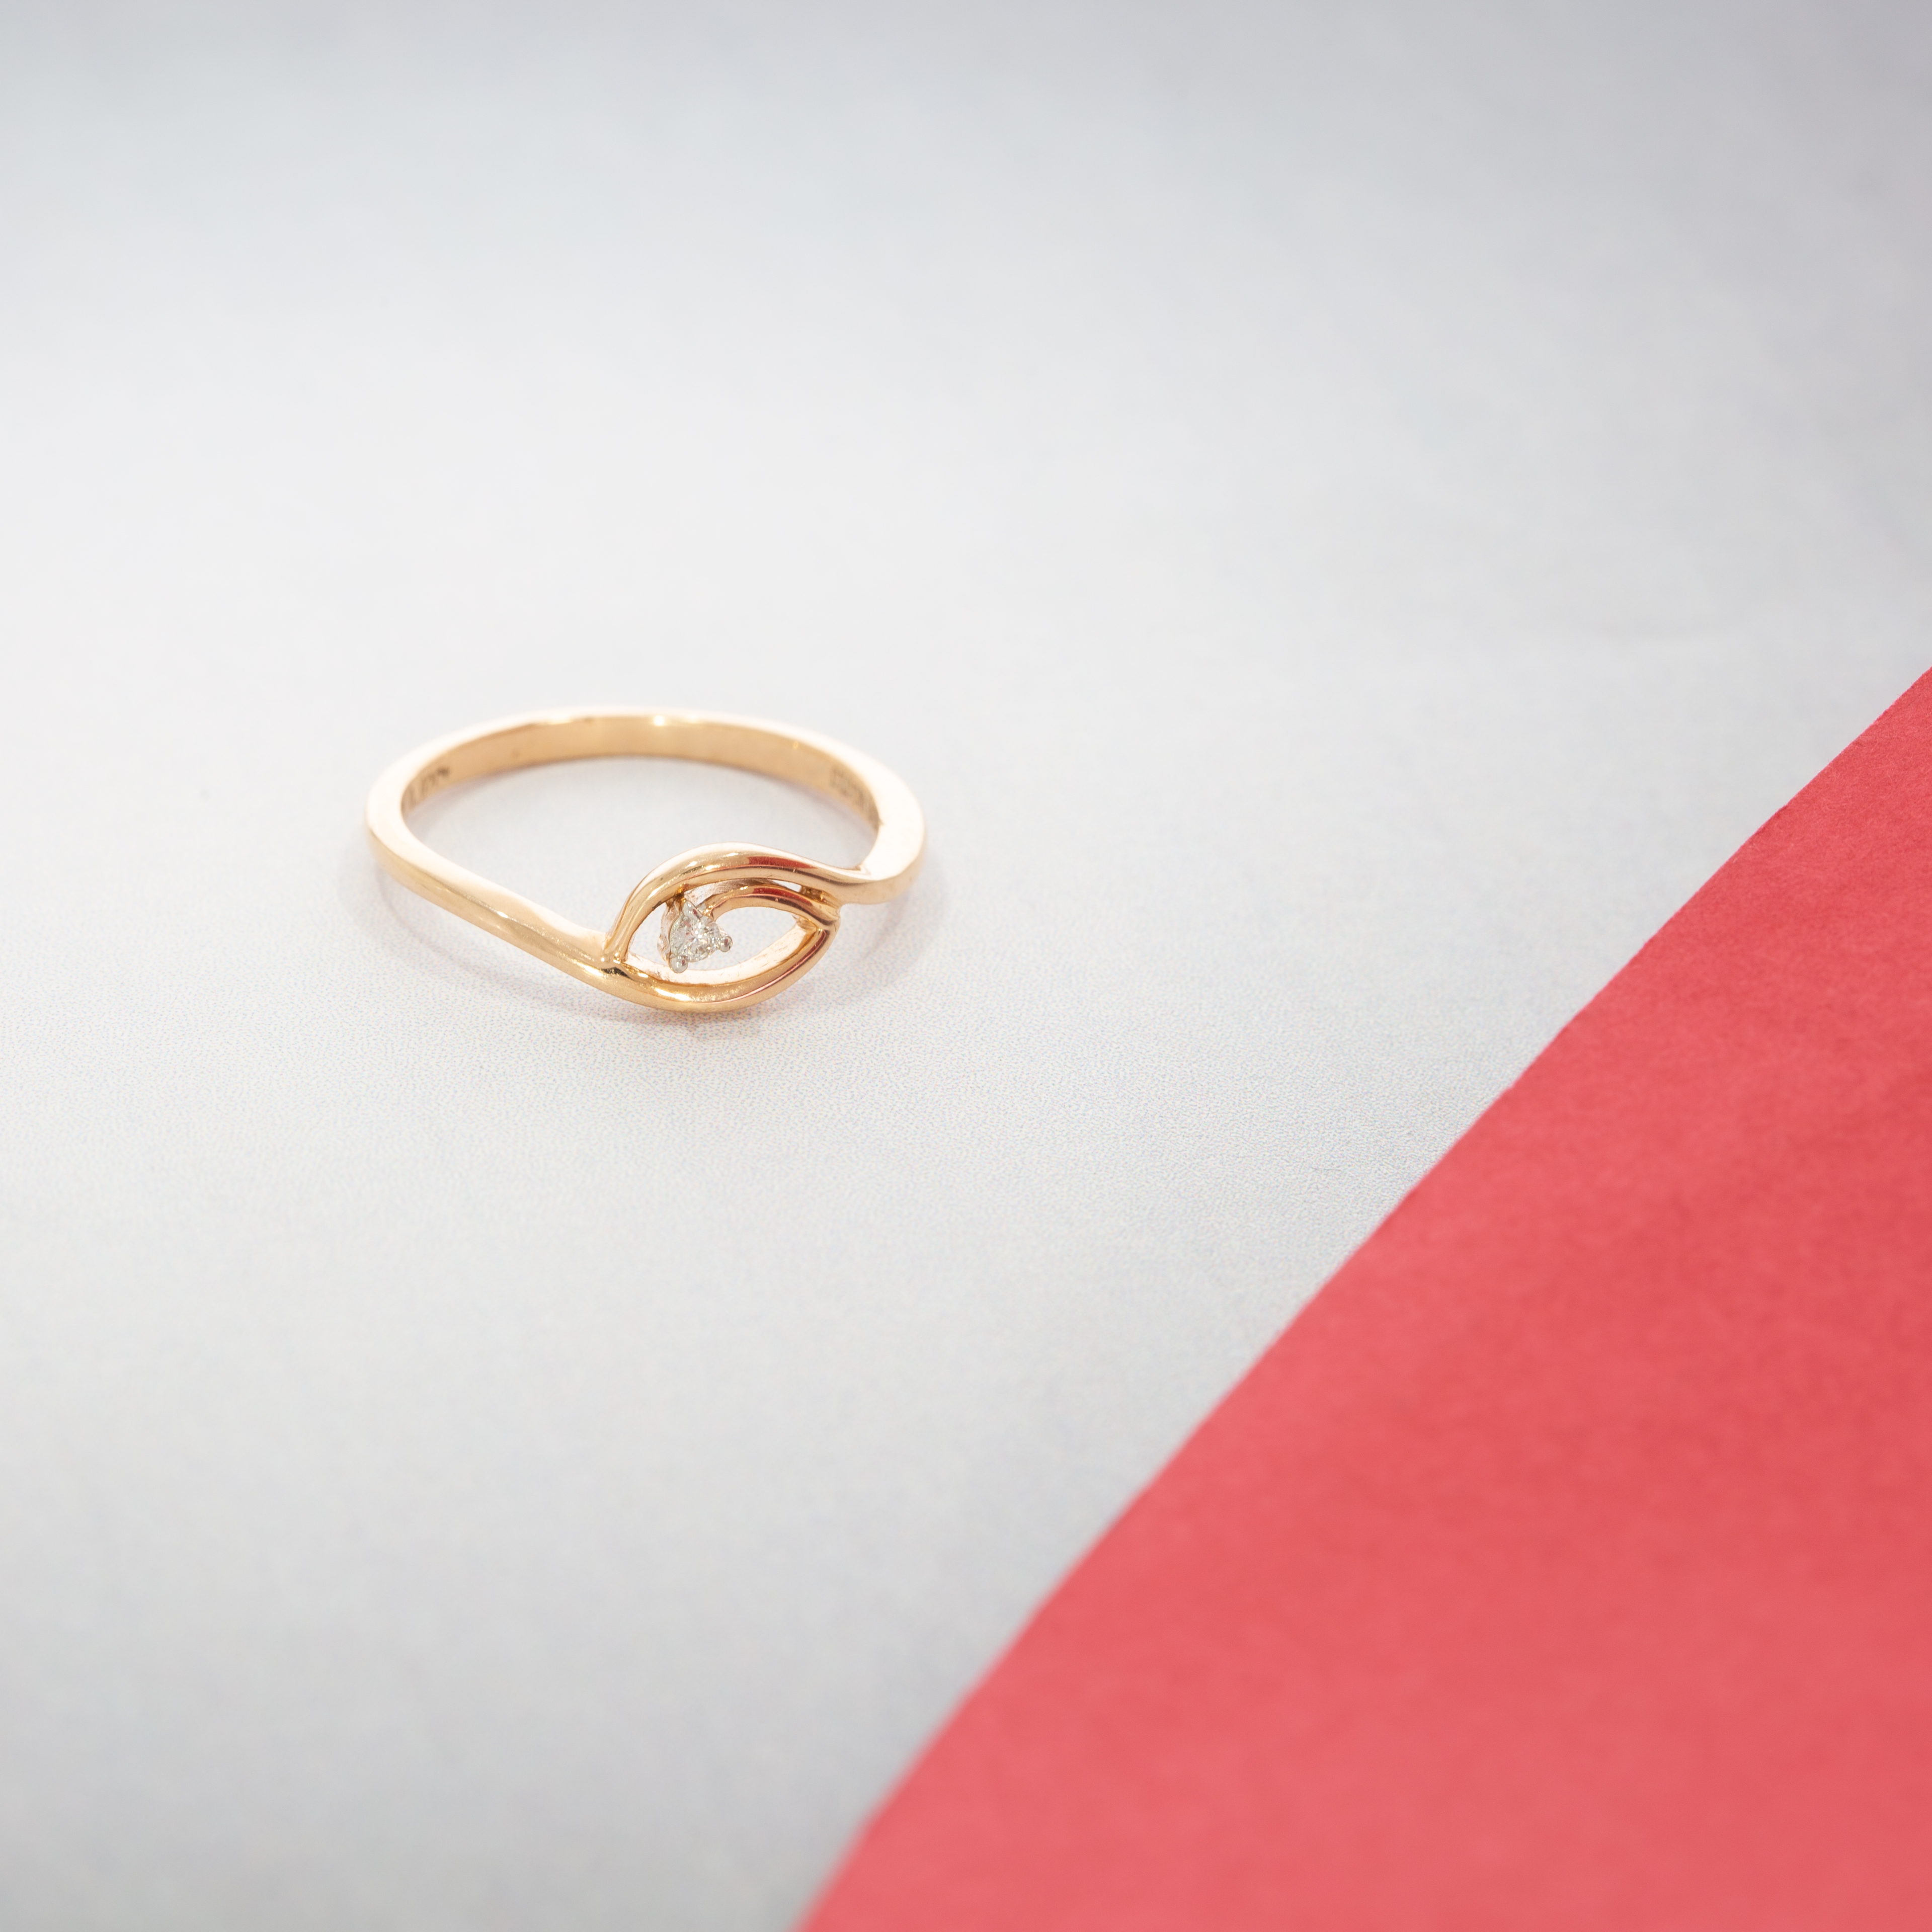 Gold Toe Ring|women's Geometric Hollow Gold-color Ring Set - Fashion Jewelry  For Parties